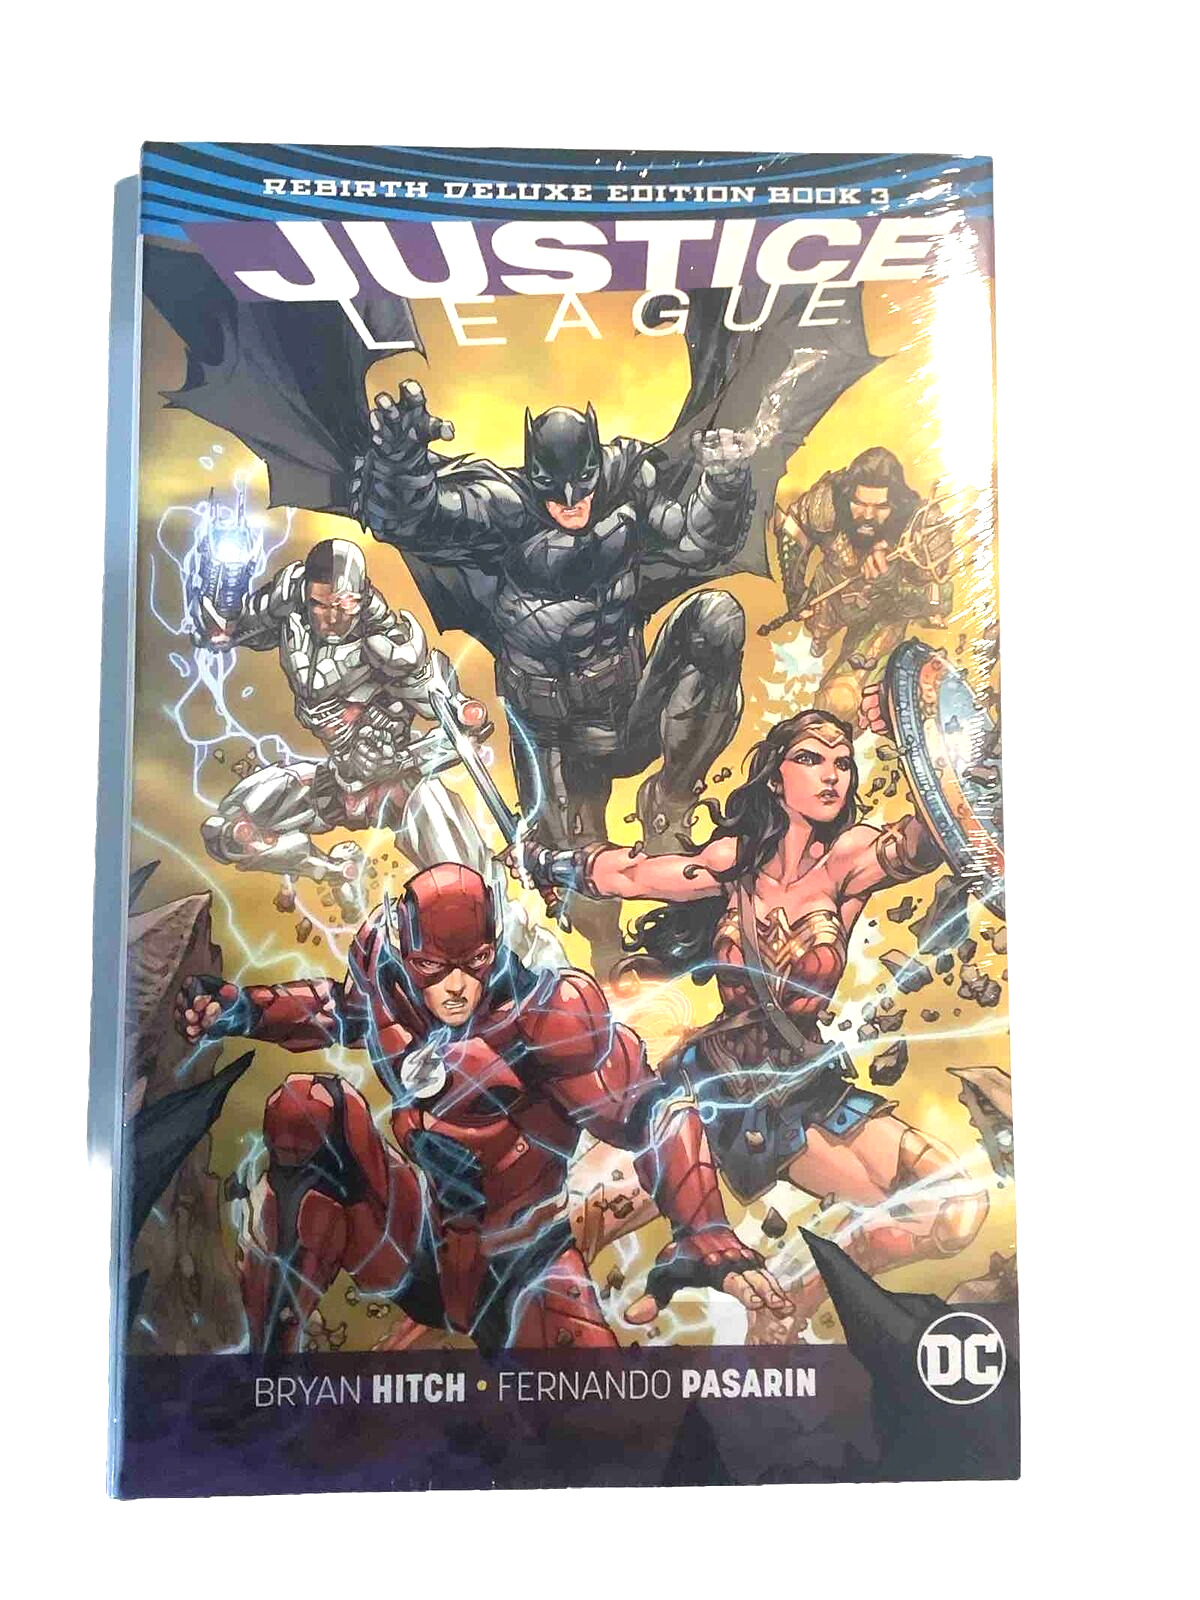 Justice League: Rebirth Deluxe Edition Vol. 3 by Bryan Hitch (2018, DC Hardcover